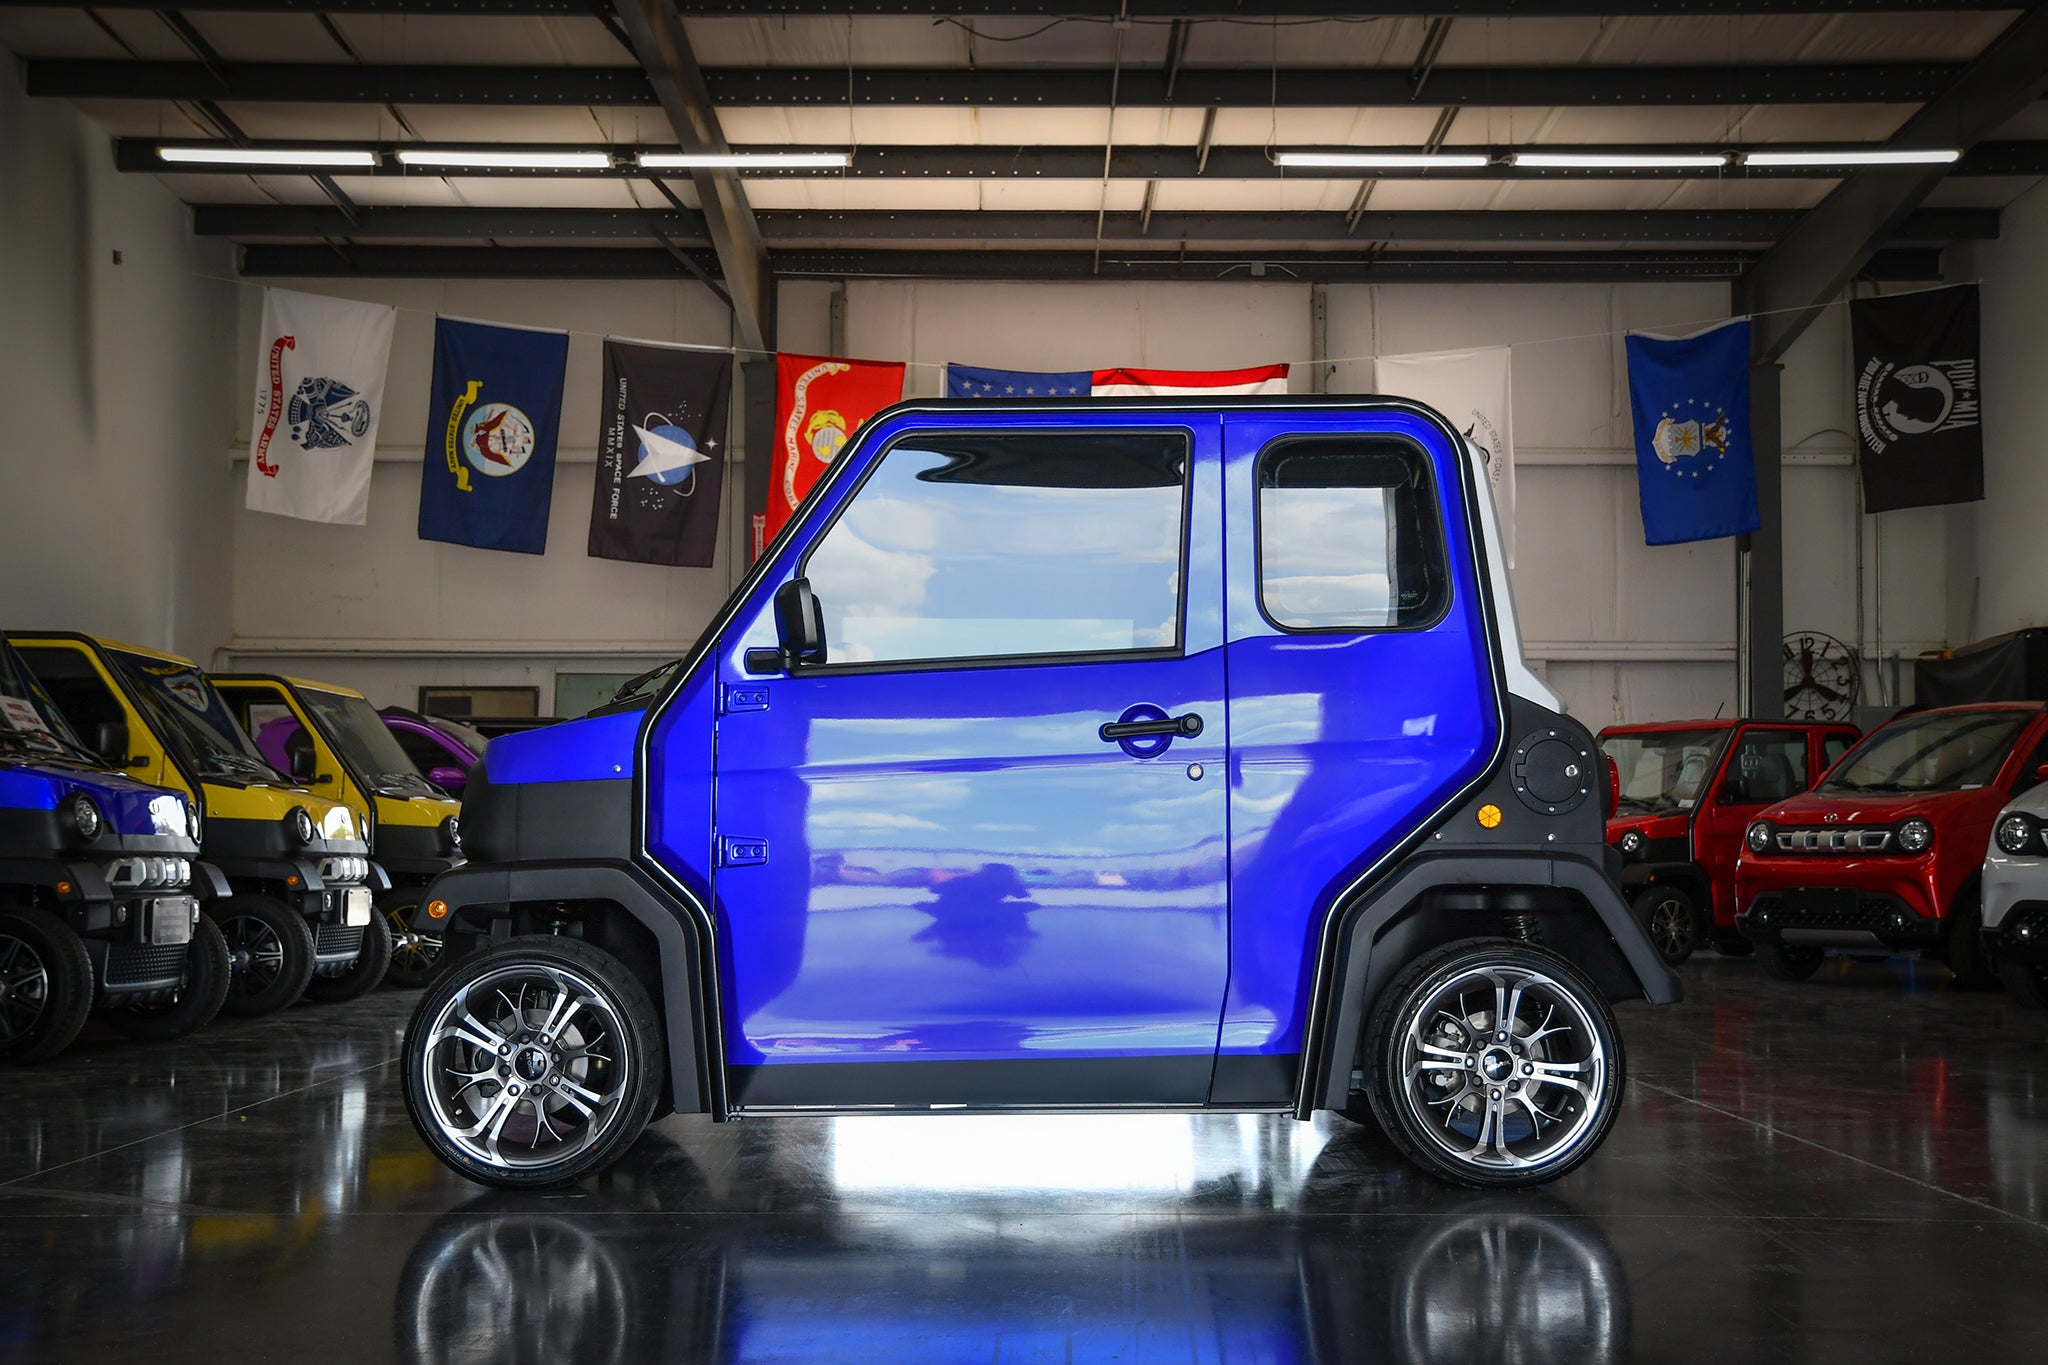 GALLERY | ATOMIC Golf Cars w/ HD GOLF Spinout